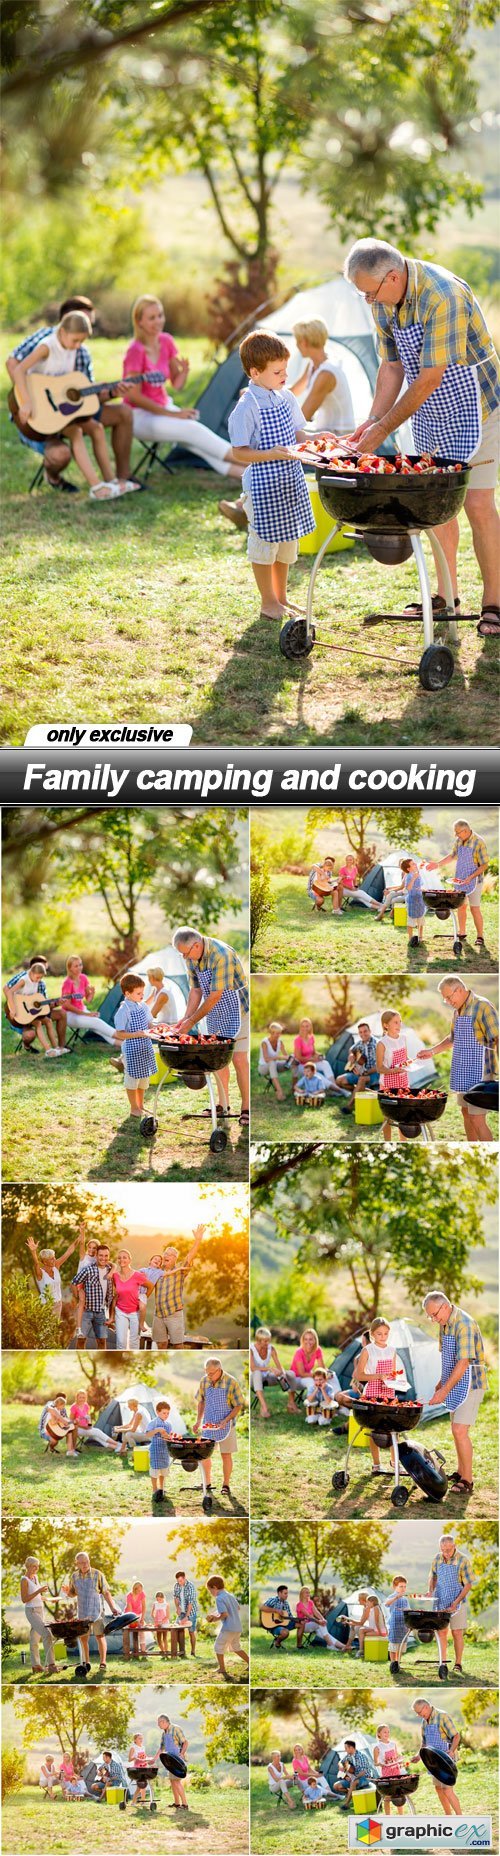 Family camping and cooking - 10 UHQ JPEG